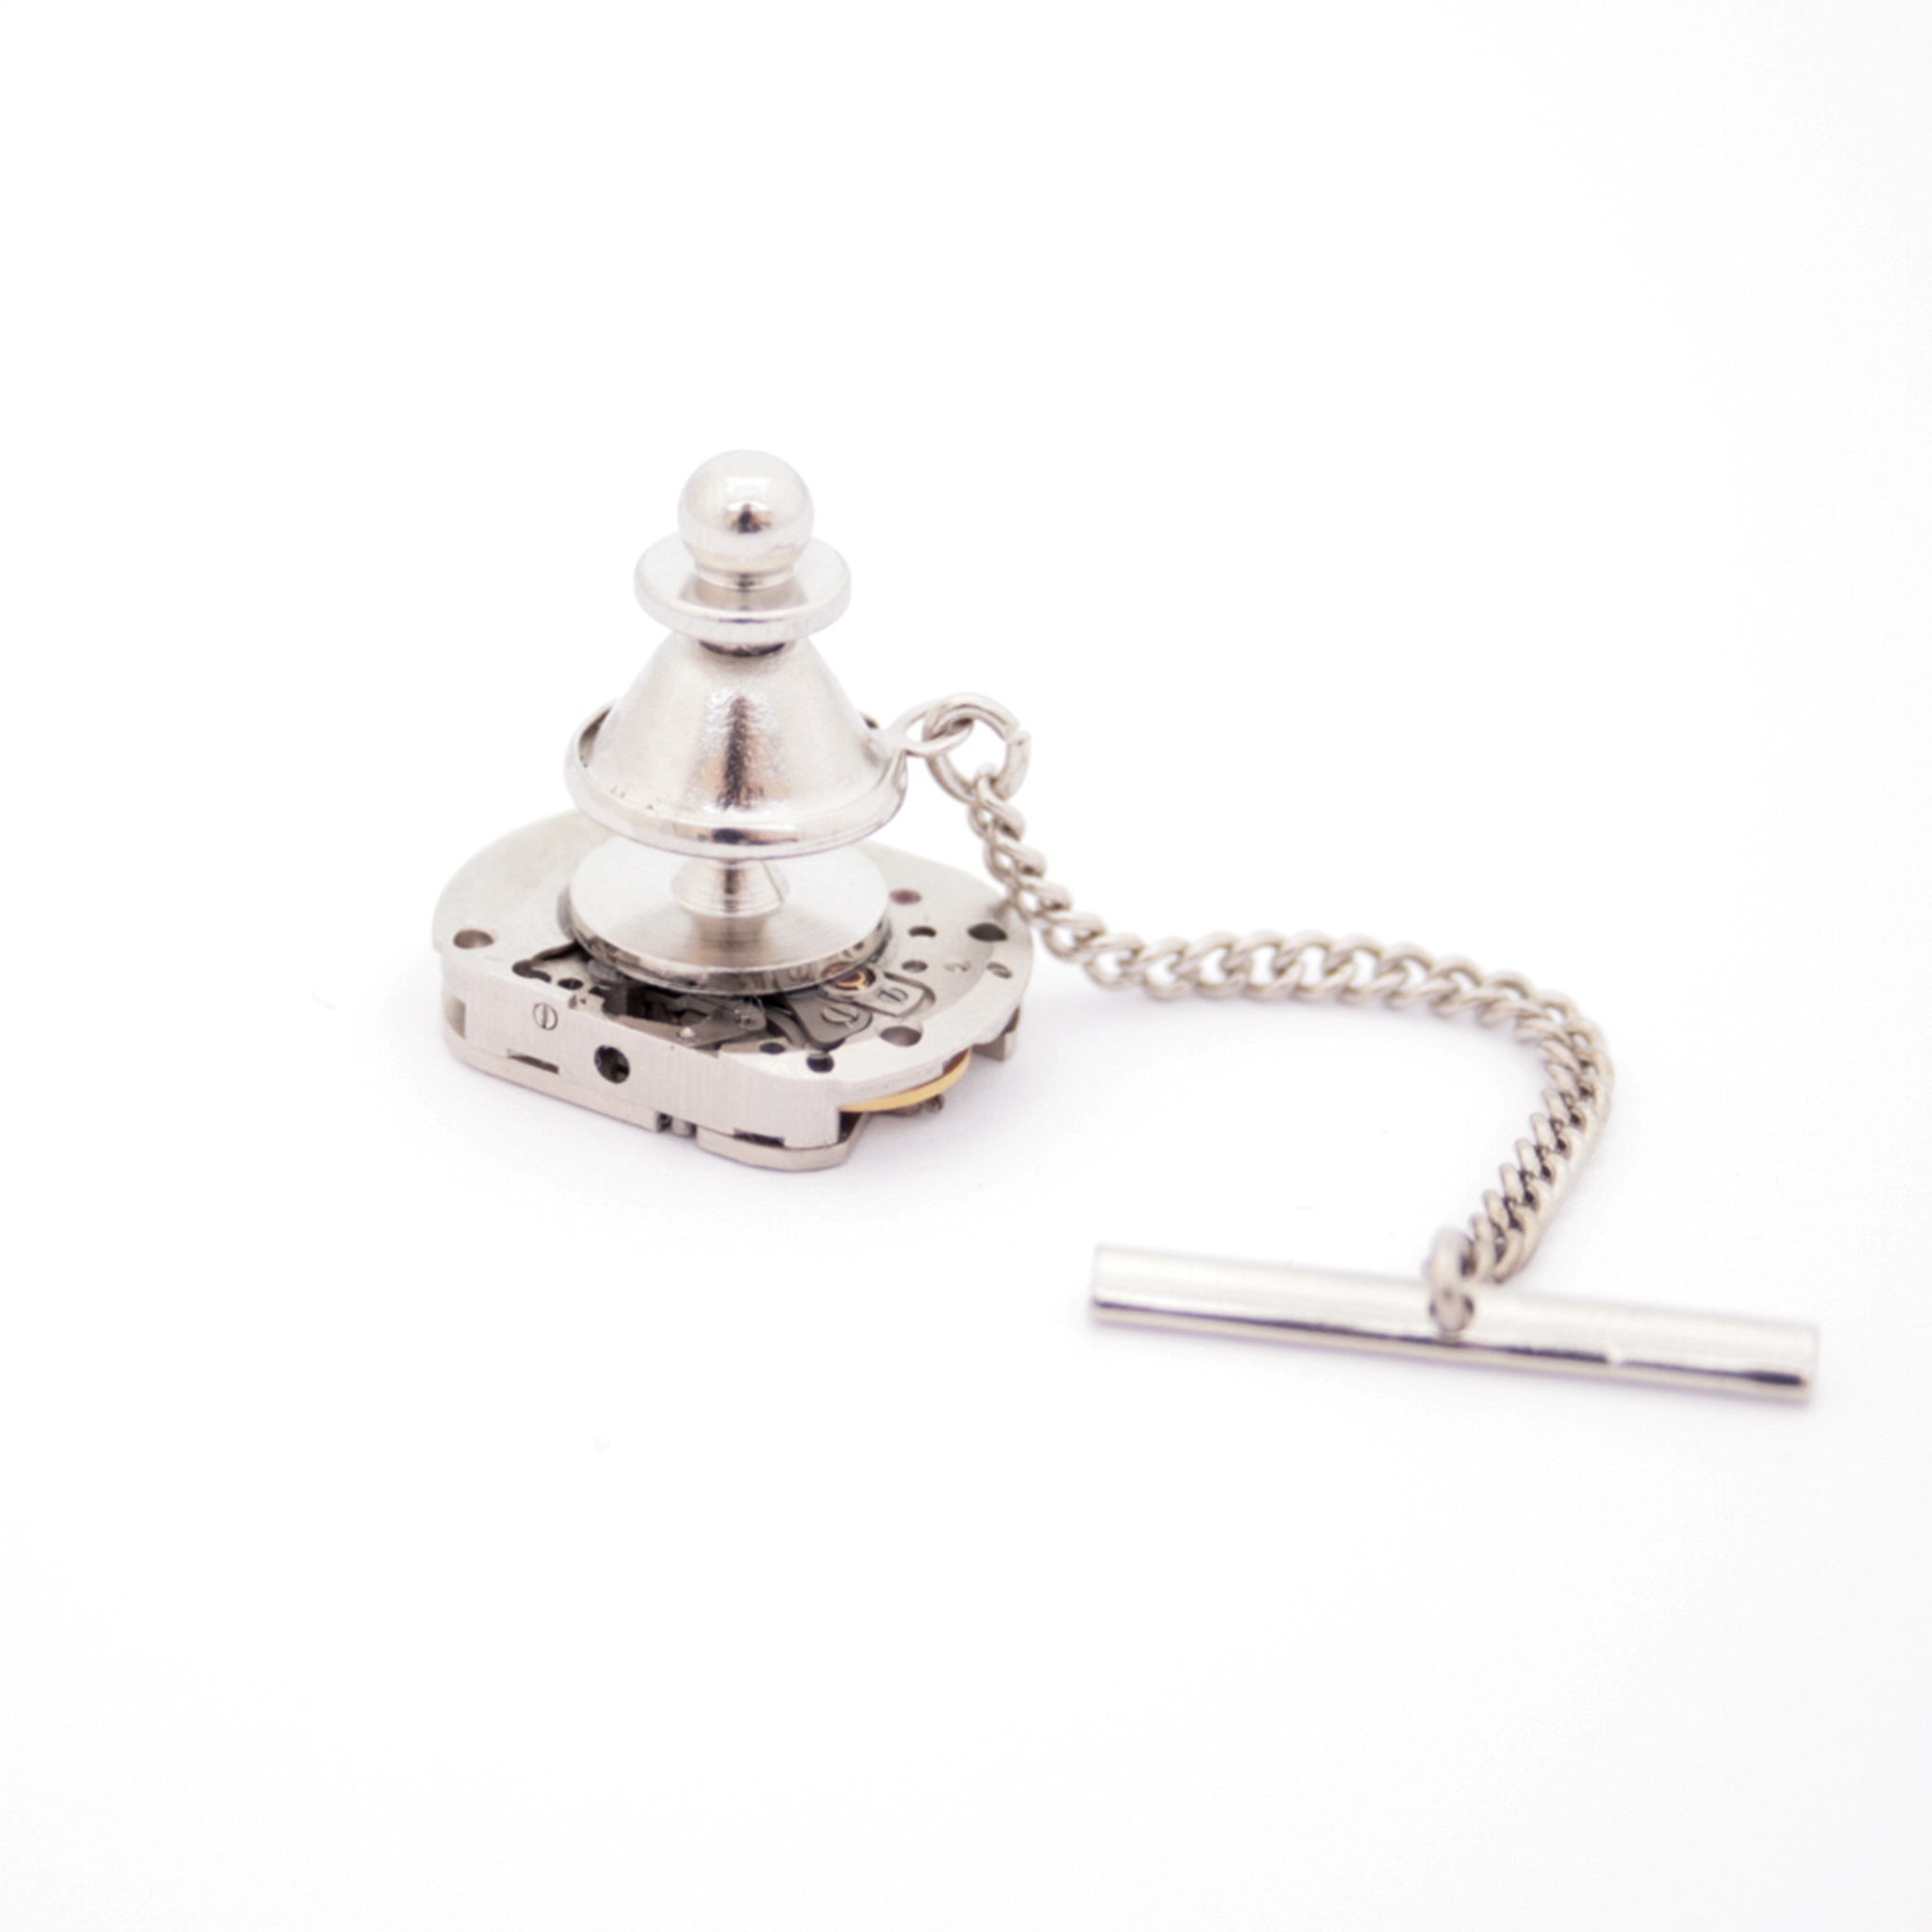 tie tack with chain made of watch movement